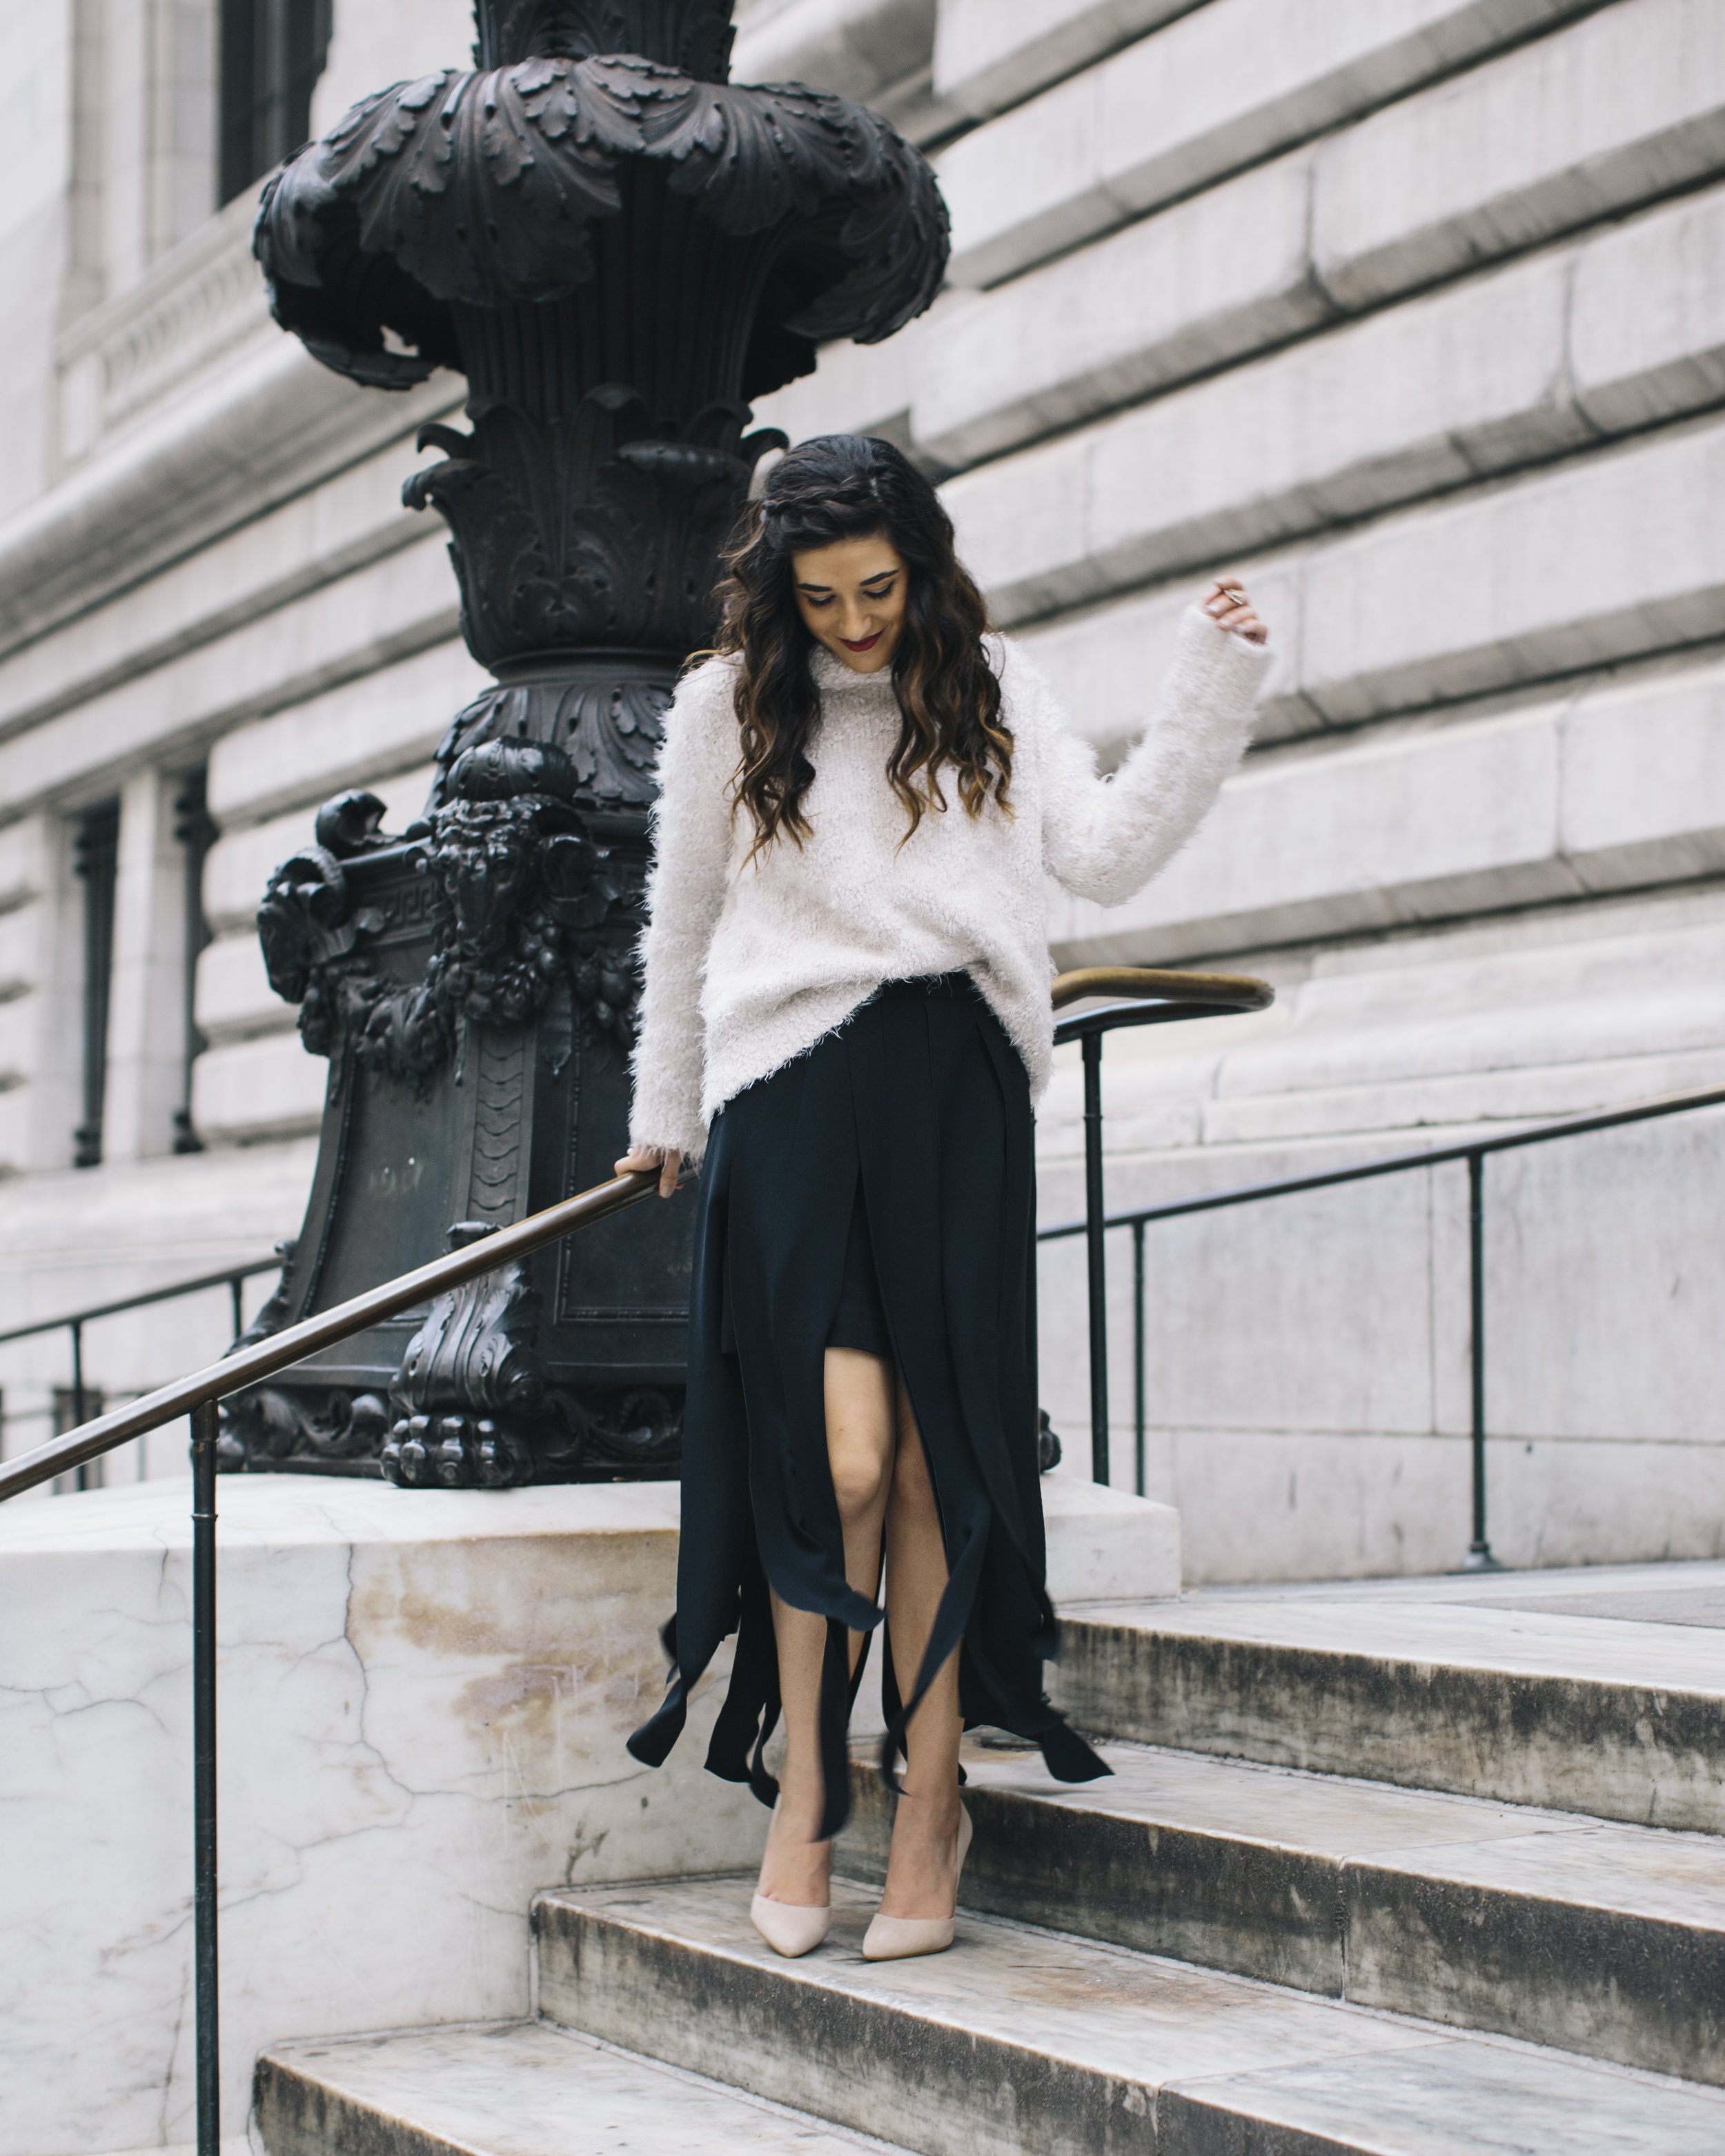 Shopping with Octer Fringe Skirt Louboutins & Love Fashion Blog Esther Santer NYC Street Style Blogger Outfit OOTD Buy Trendy Sweater Cozy Zara Steve Madden Nude Heels Neutral Colors Navy White Winter New York City Beautiful Photoshoot Hair Women Girl.jpg